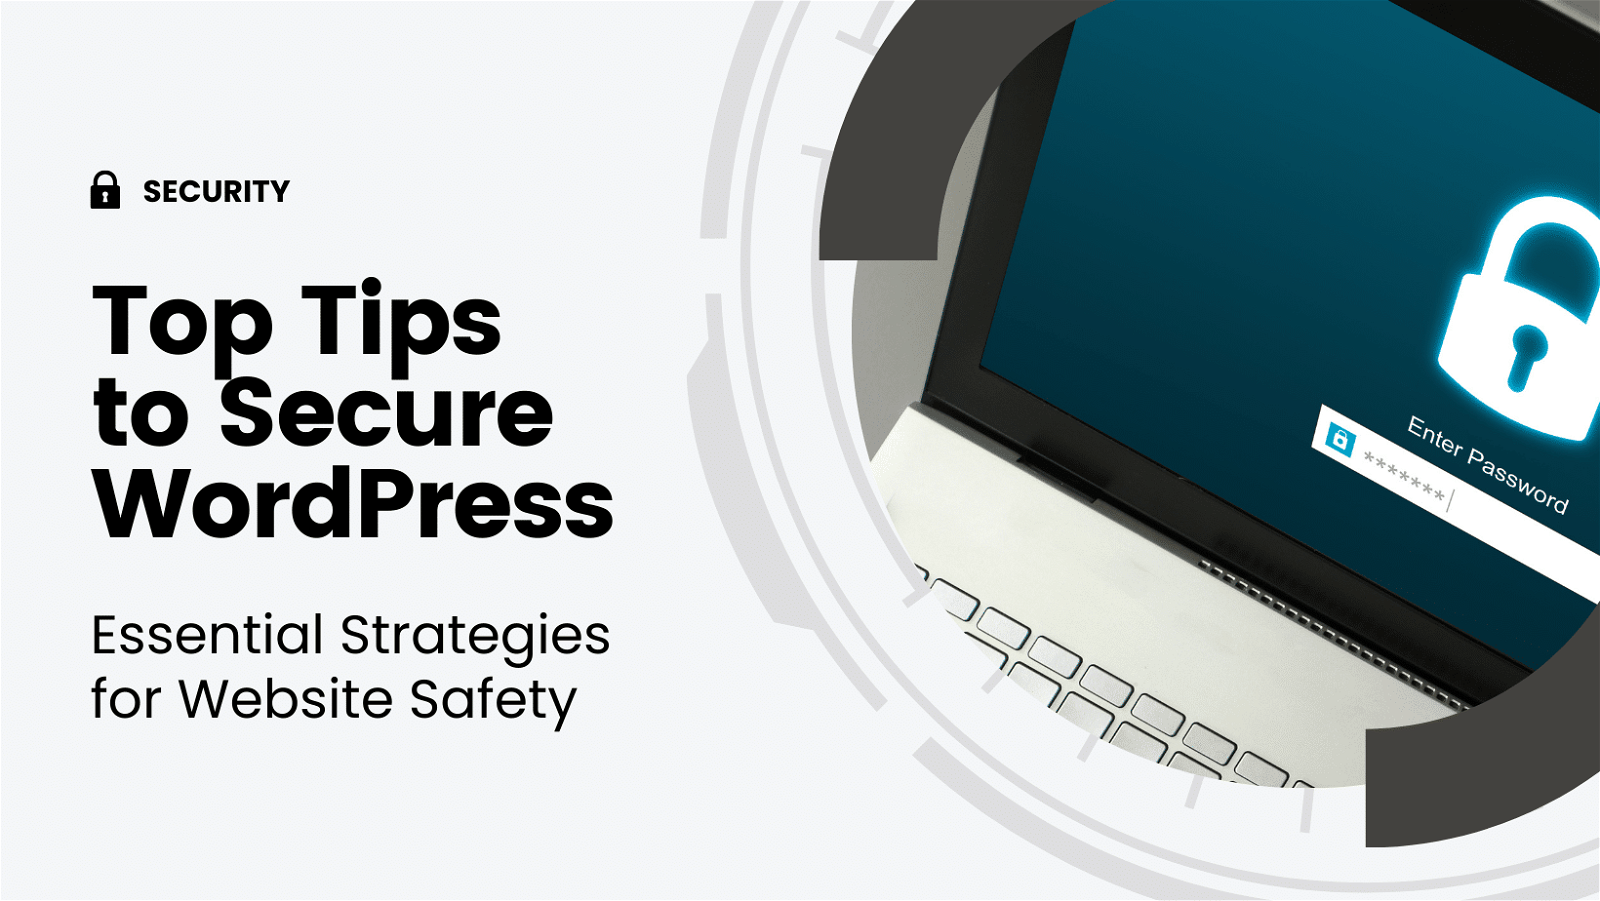 Top tips to secure wordpress essential strategies for website safety.